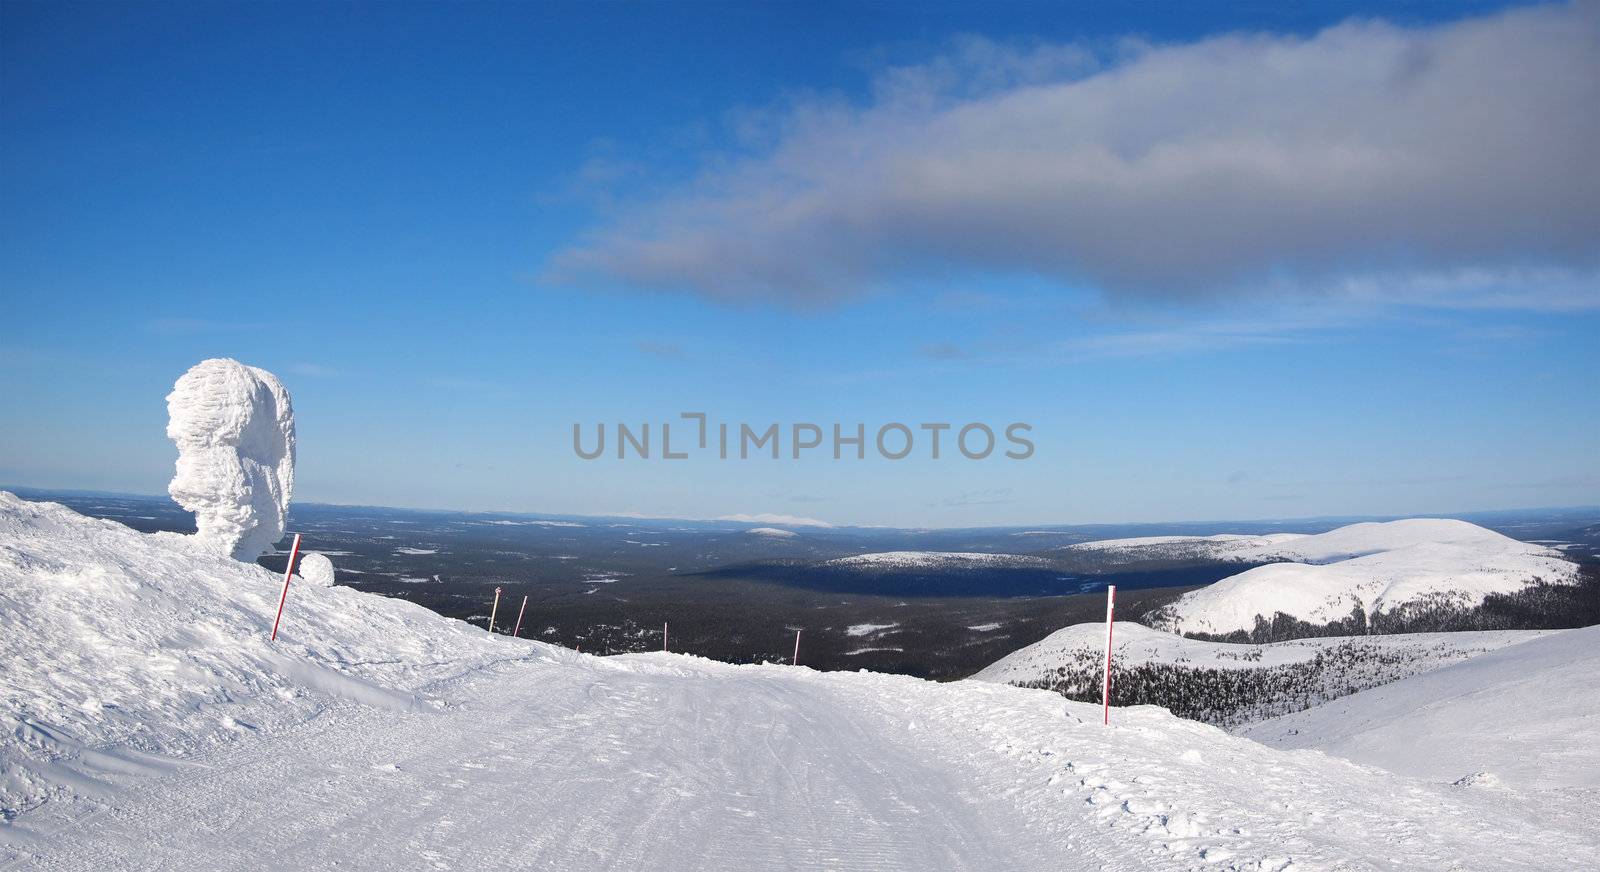 Typical Lapland ski slope with view over the vast forest landscape in the Finnish ski area of Yllas in Lapland, Finland.